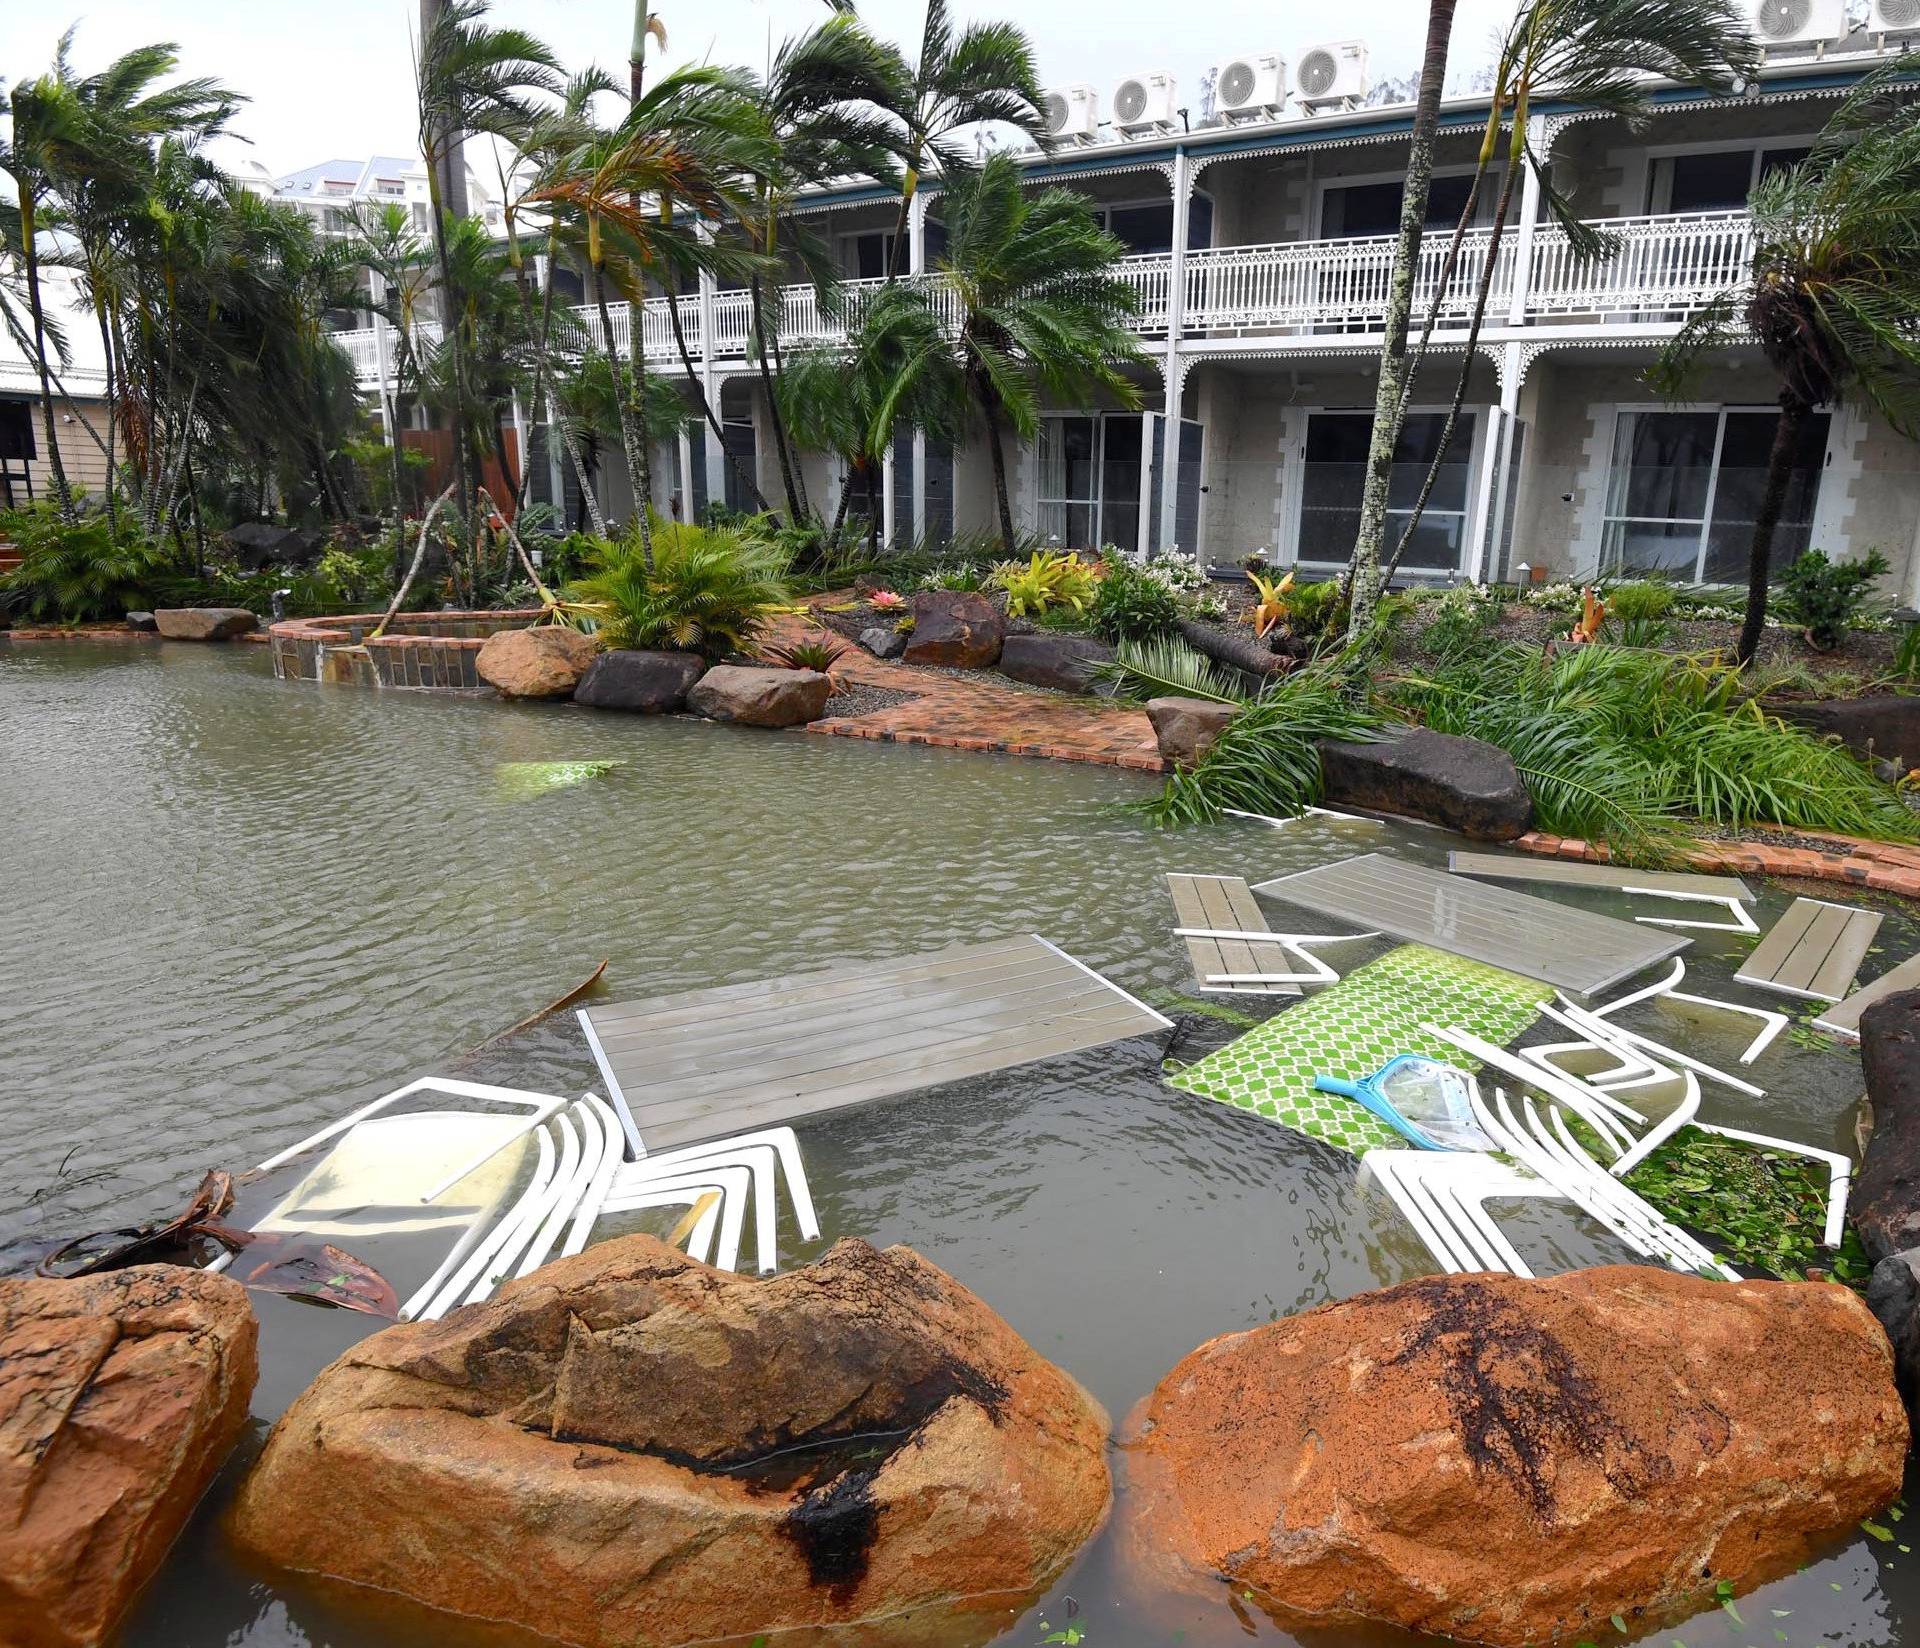 Outdoor furniture lies in a pool at a motel as Cyclone Debbie hits the northern Queensland town of Airlie Beach, located south of Townsville in Australia